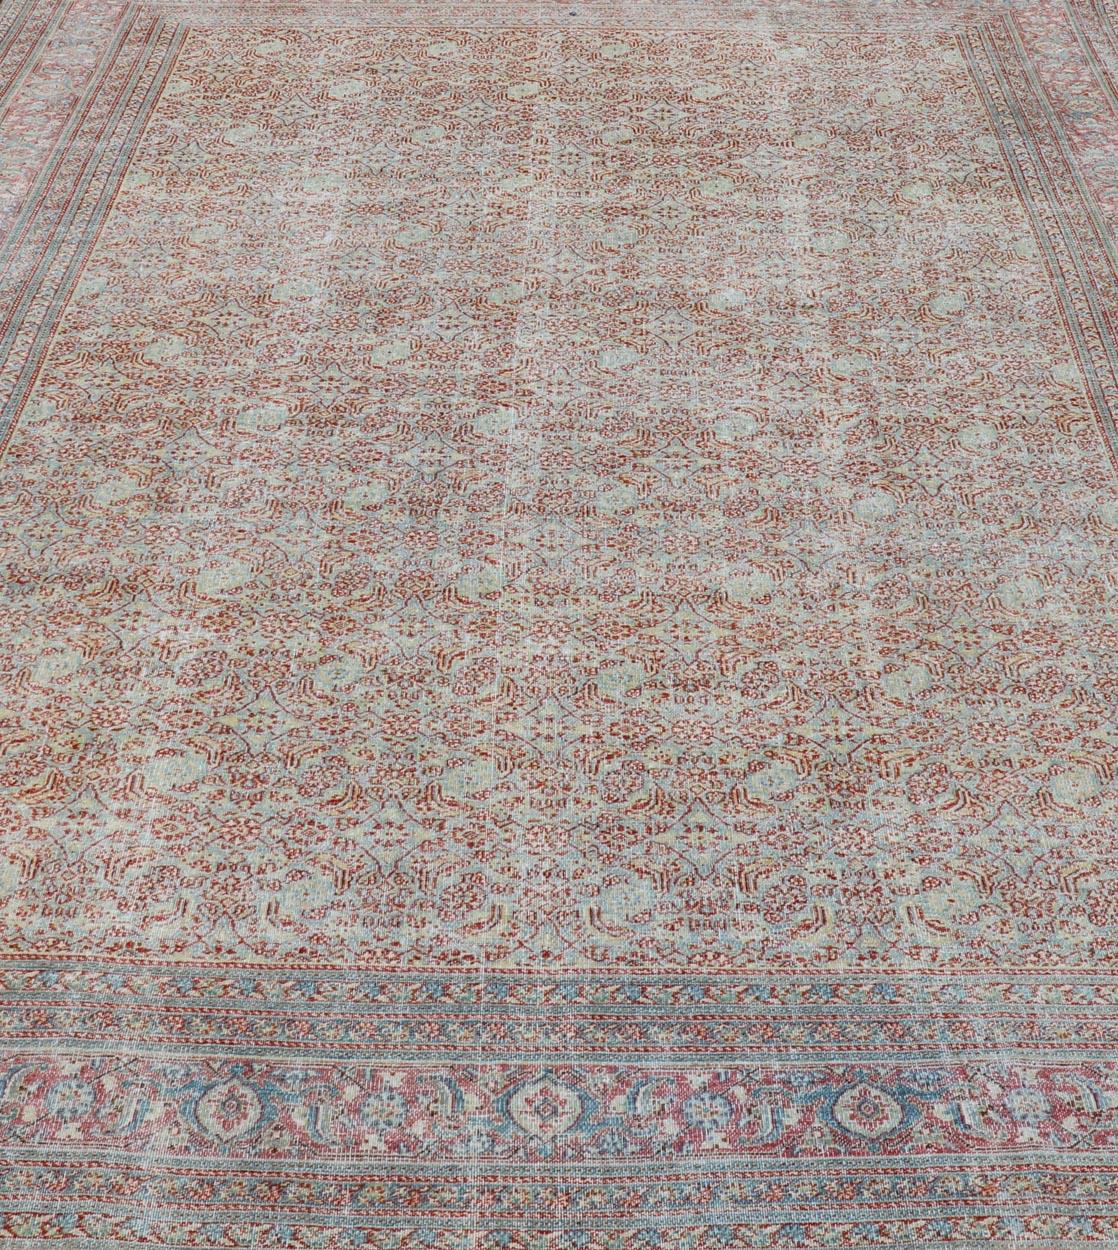 Antique Persian Khorassan Rug with All-Over Floral Design in Red and Blue In Good Condition For Sale In Atlanta, GA